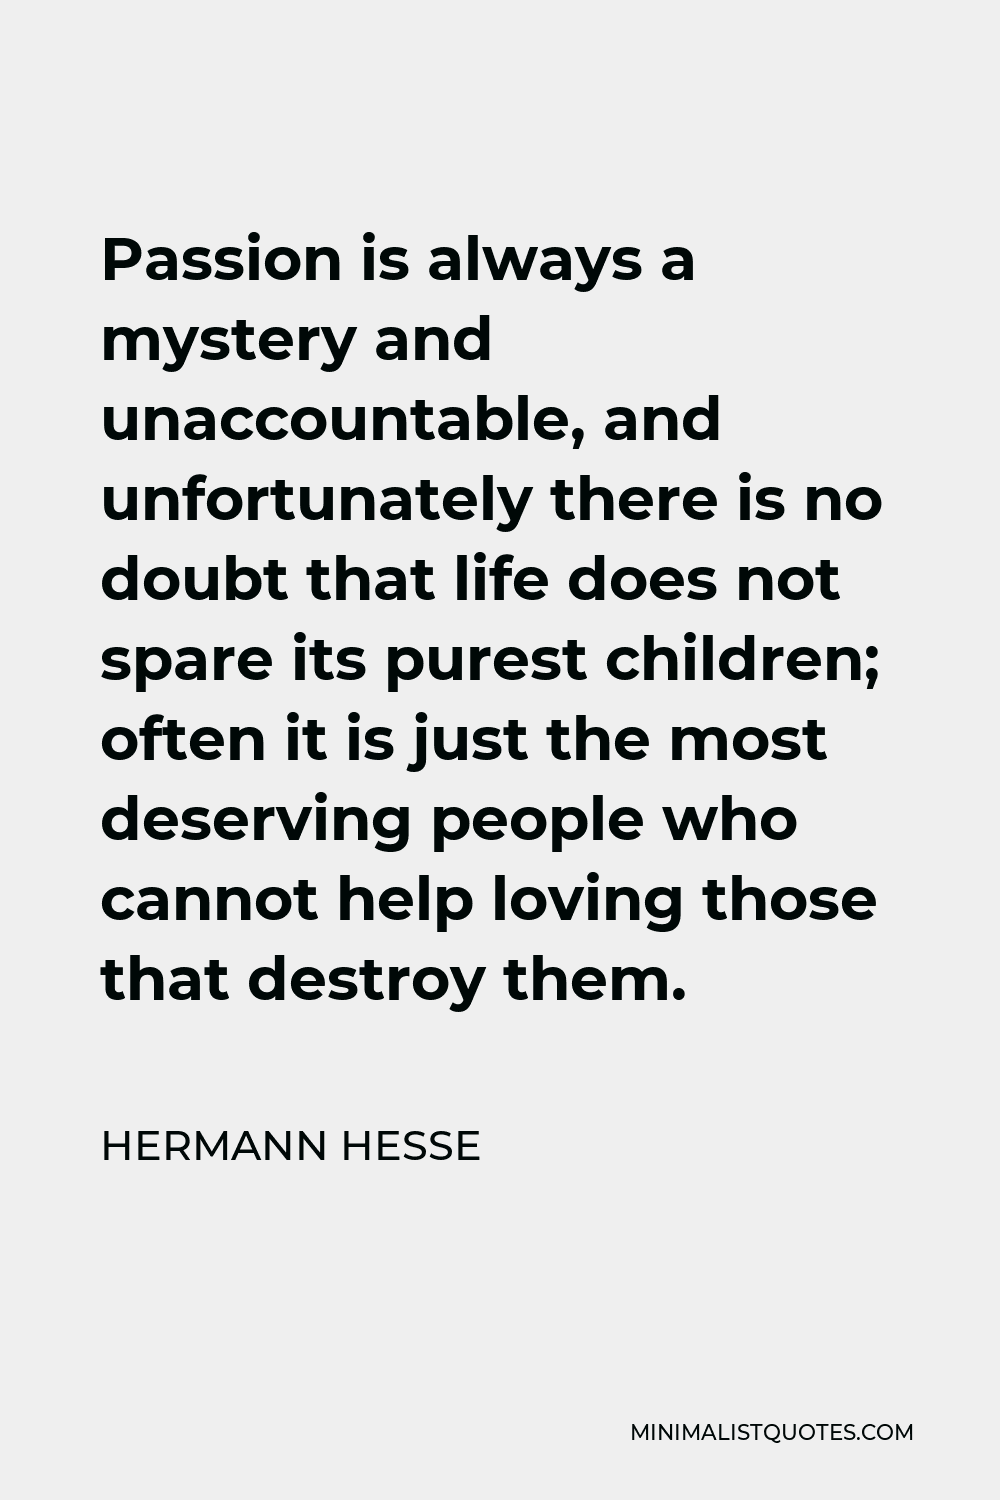 Hermann Hesse Quote - Passion is always a mystery and unaccountable, and unfortunately there is no doubt that life does not spare its purest children; often it is just the most deserving people who cannot help loving those that destroy them.